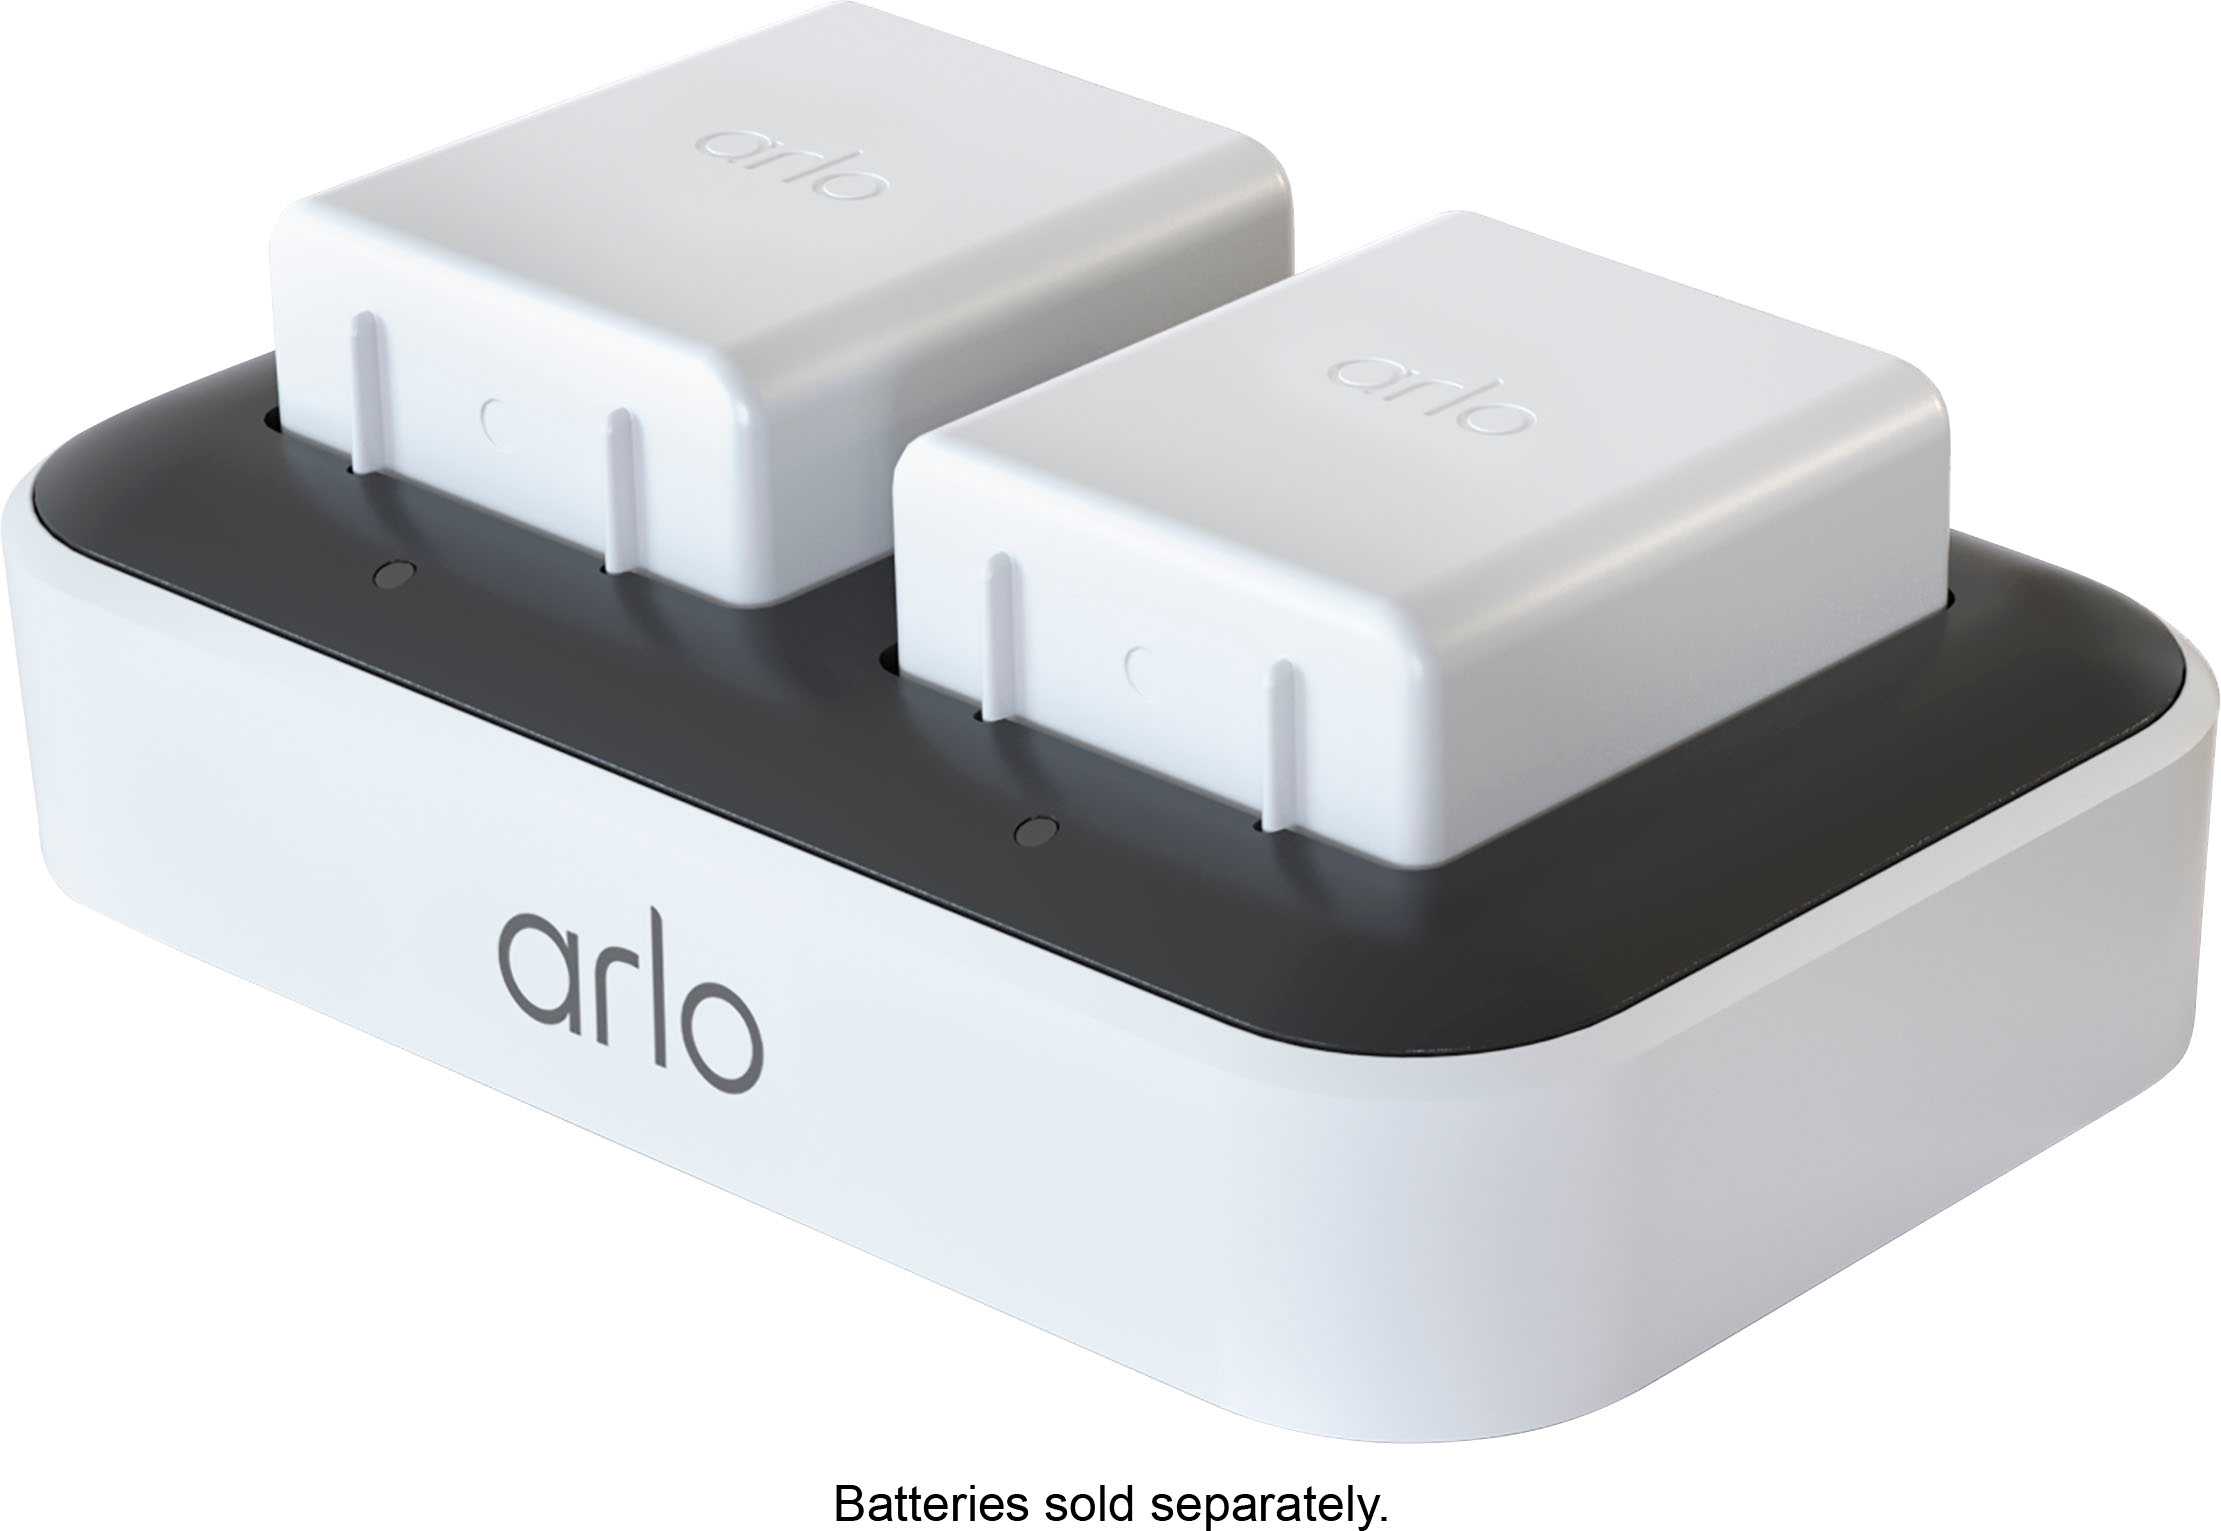 Charge up to 2 Arlo PRO or Arlo GO Batteries at The Same time by Wasserstein White Charging Station Compatible with Arlo Pro & Arlo Pro 2 & Arlo Go Rechargeable Batteries 